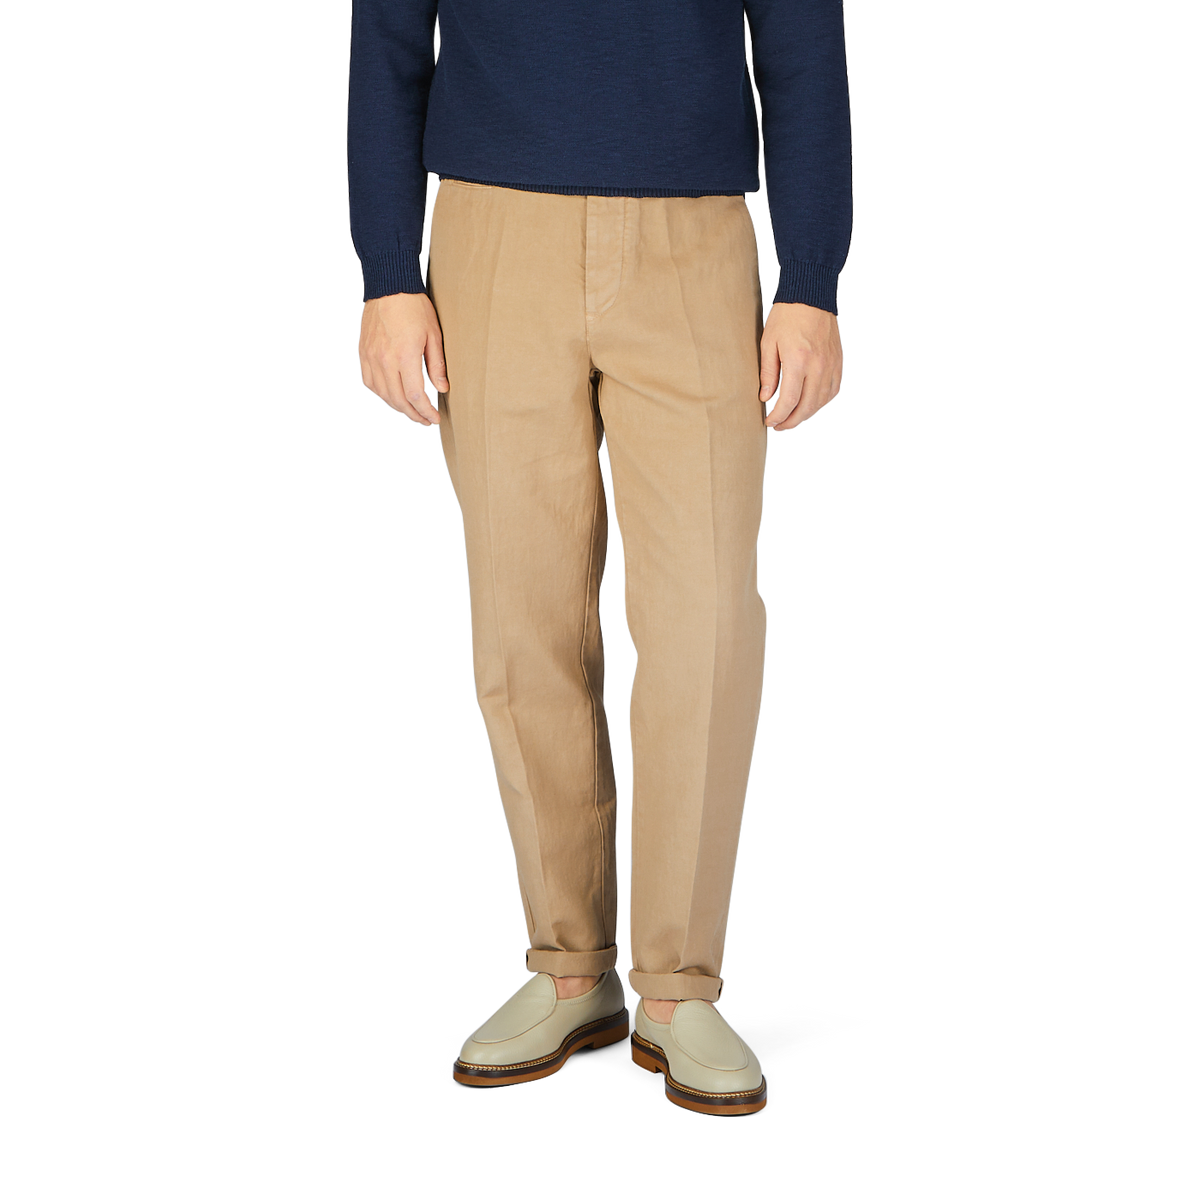 A man wearing Beige Cotton Linen Duilio Trousers from Tela Genova and a navy sweater.